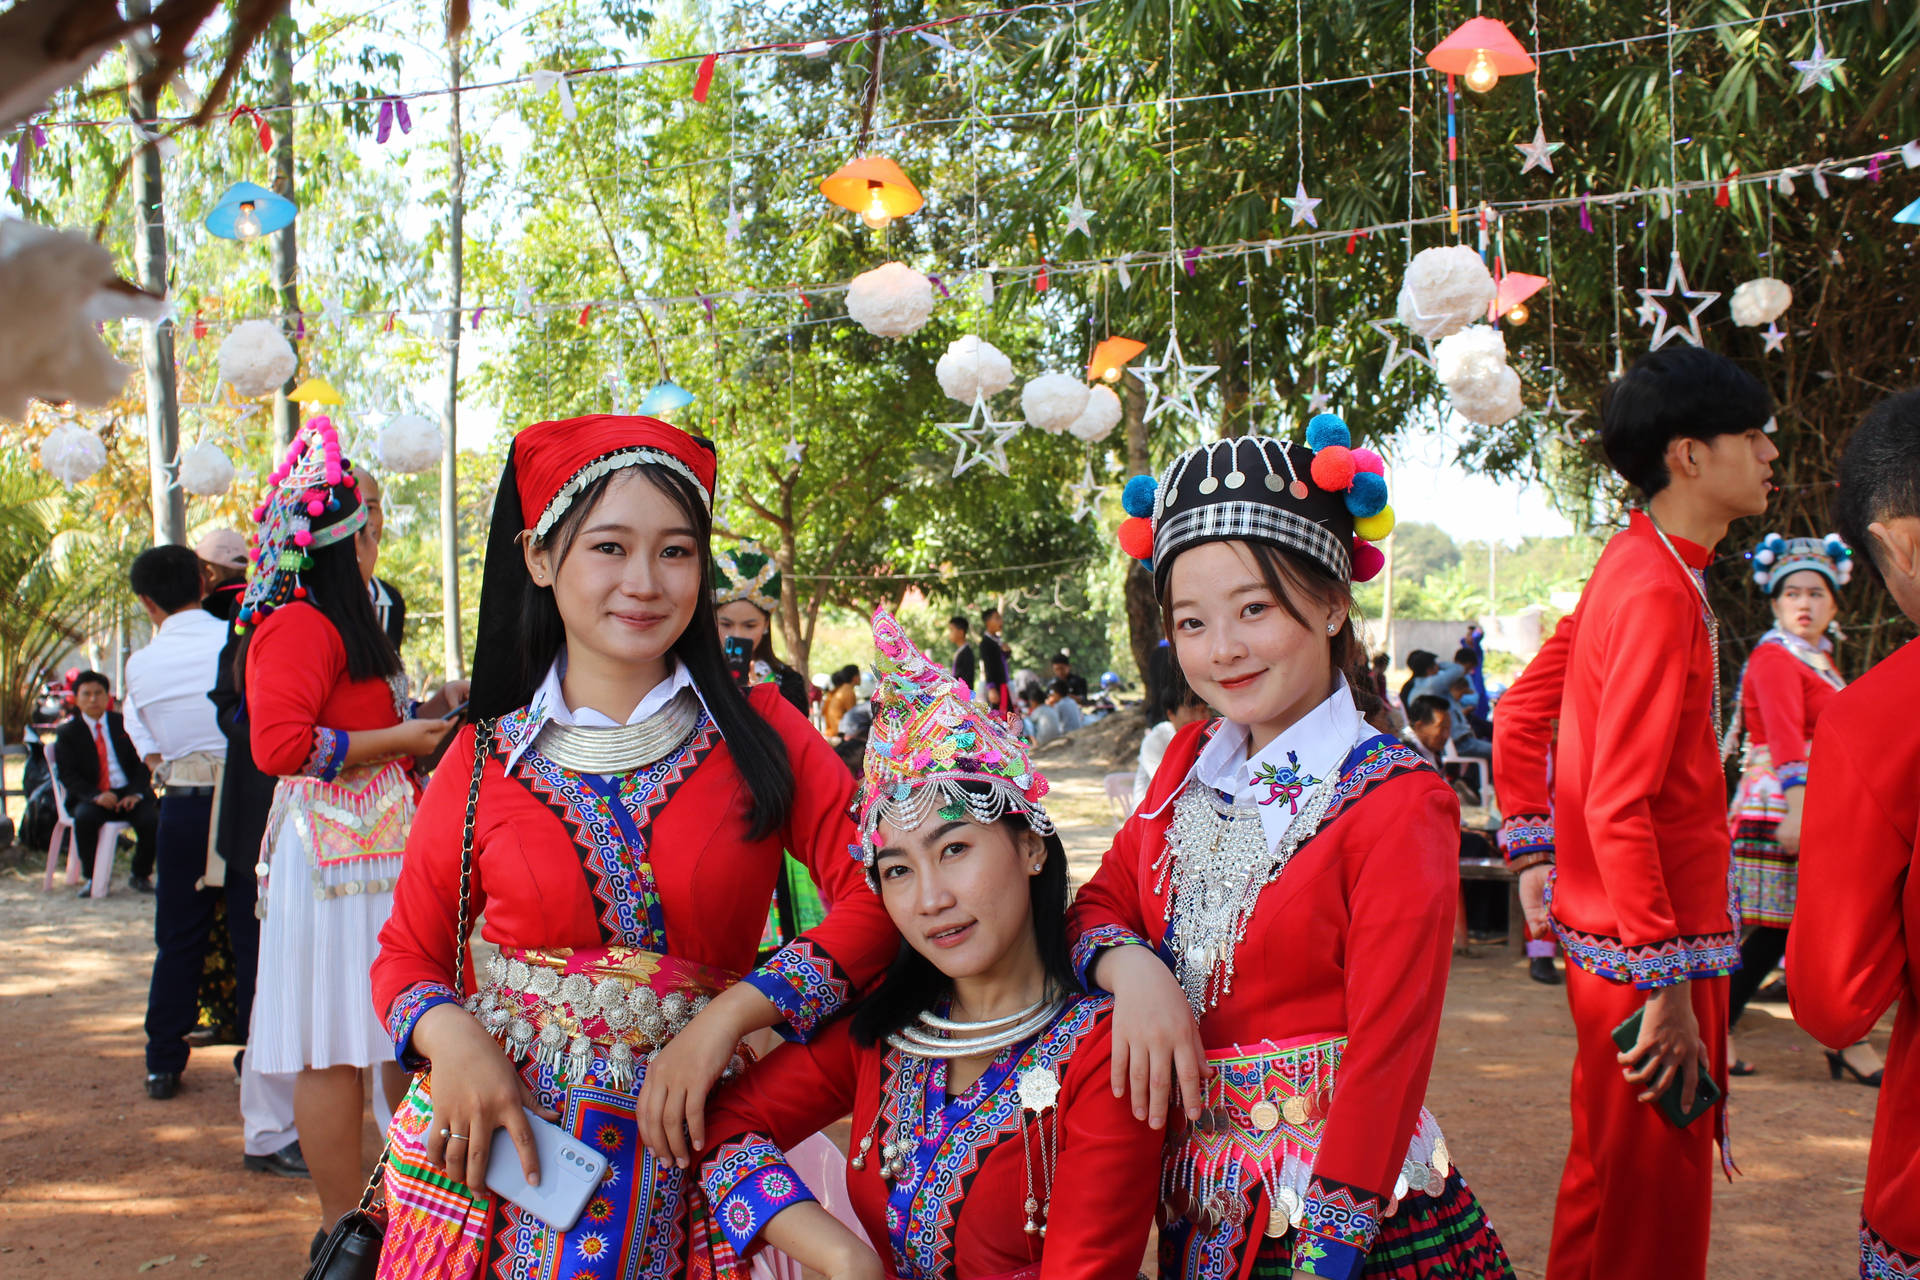 Laos Wearing Native Outfit